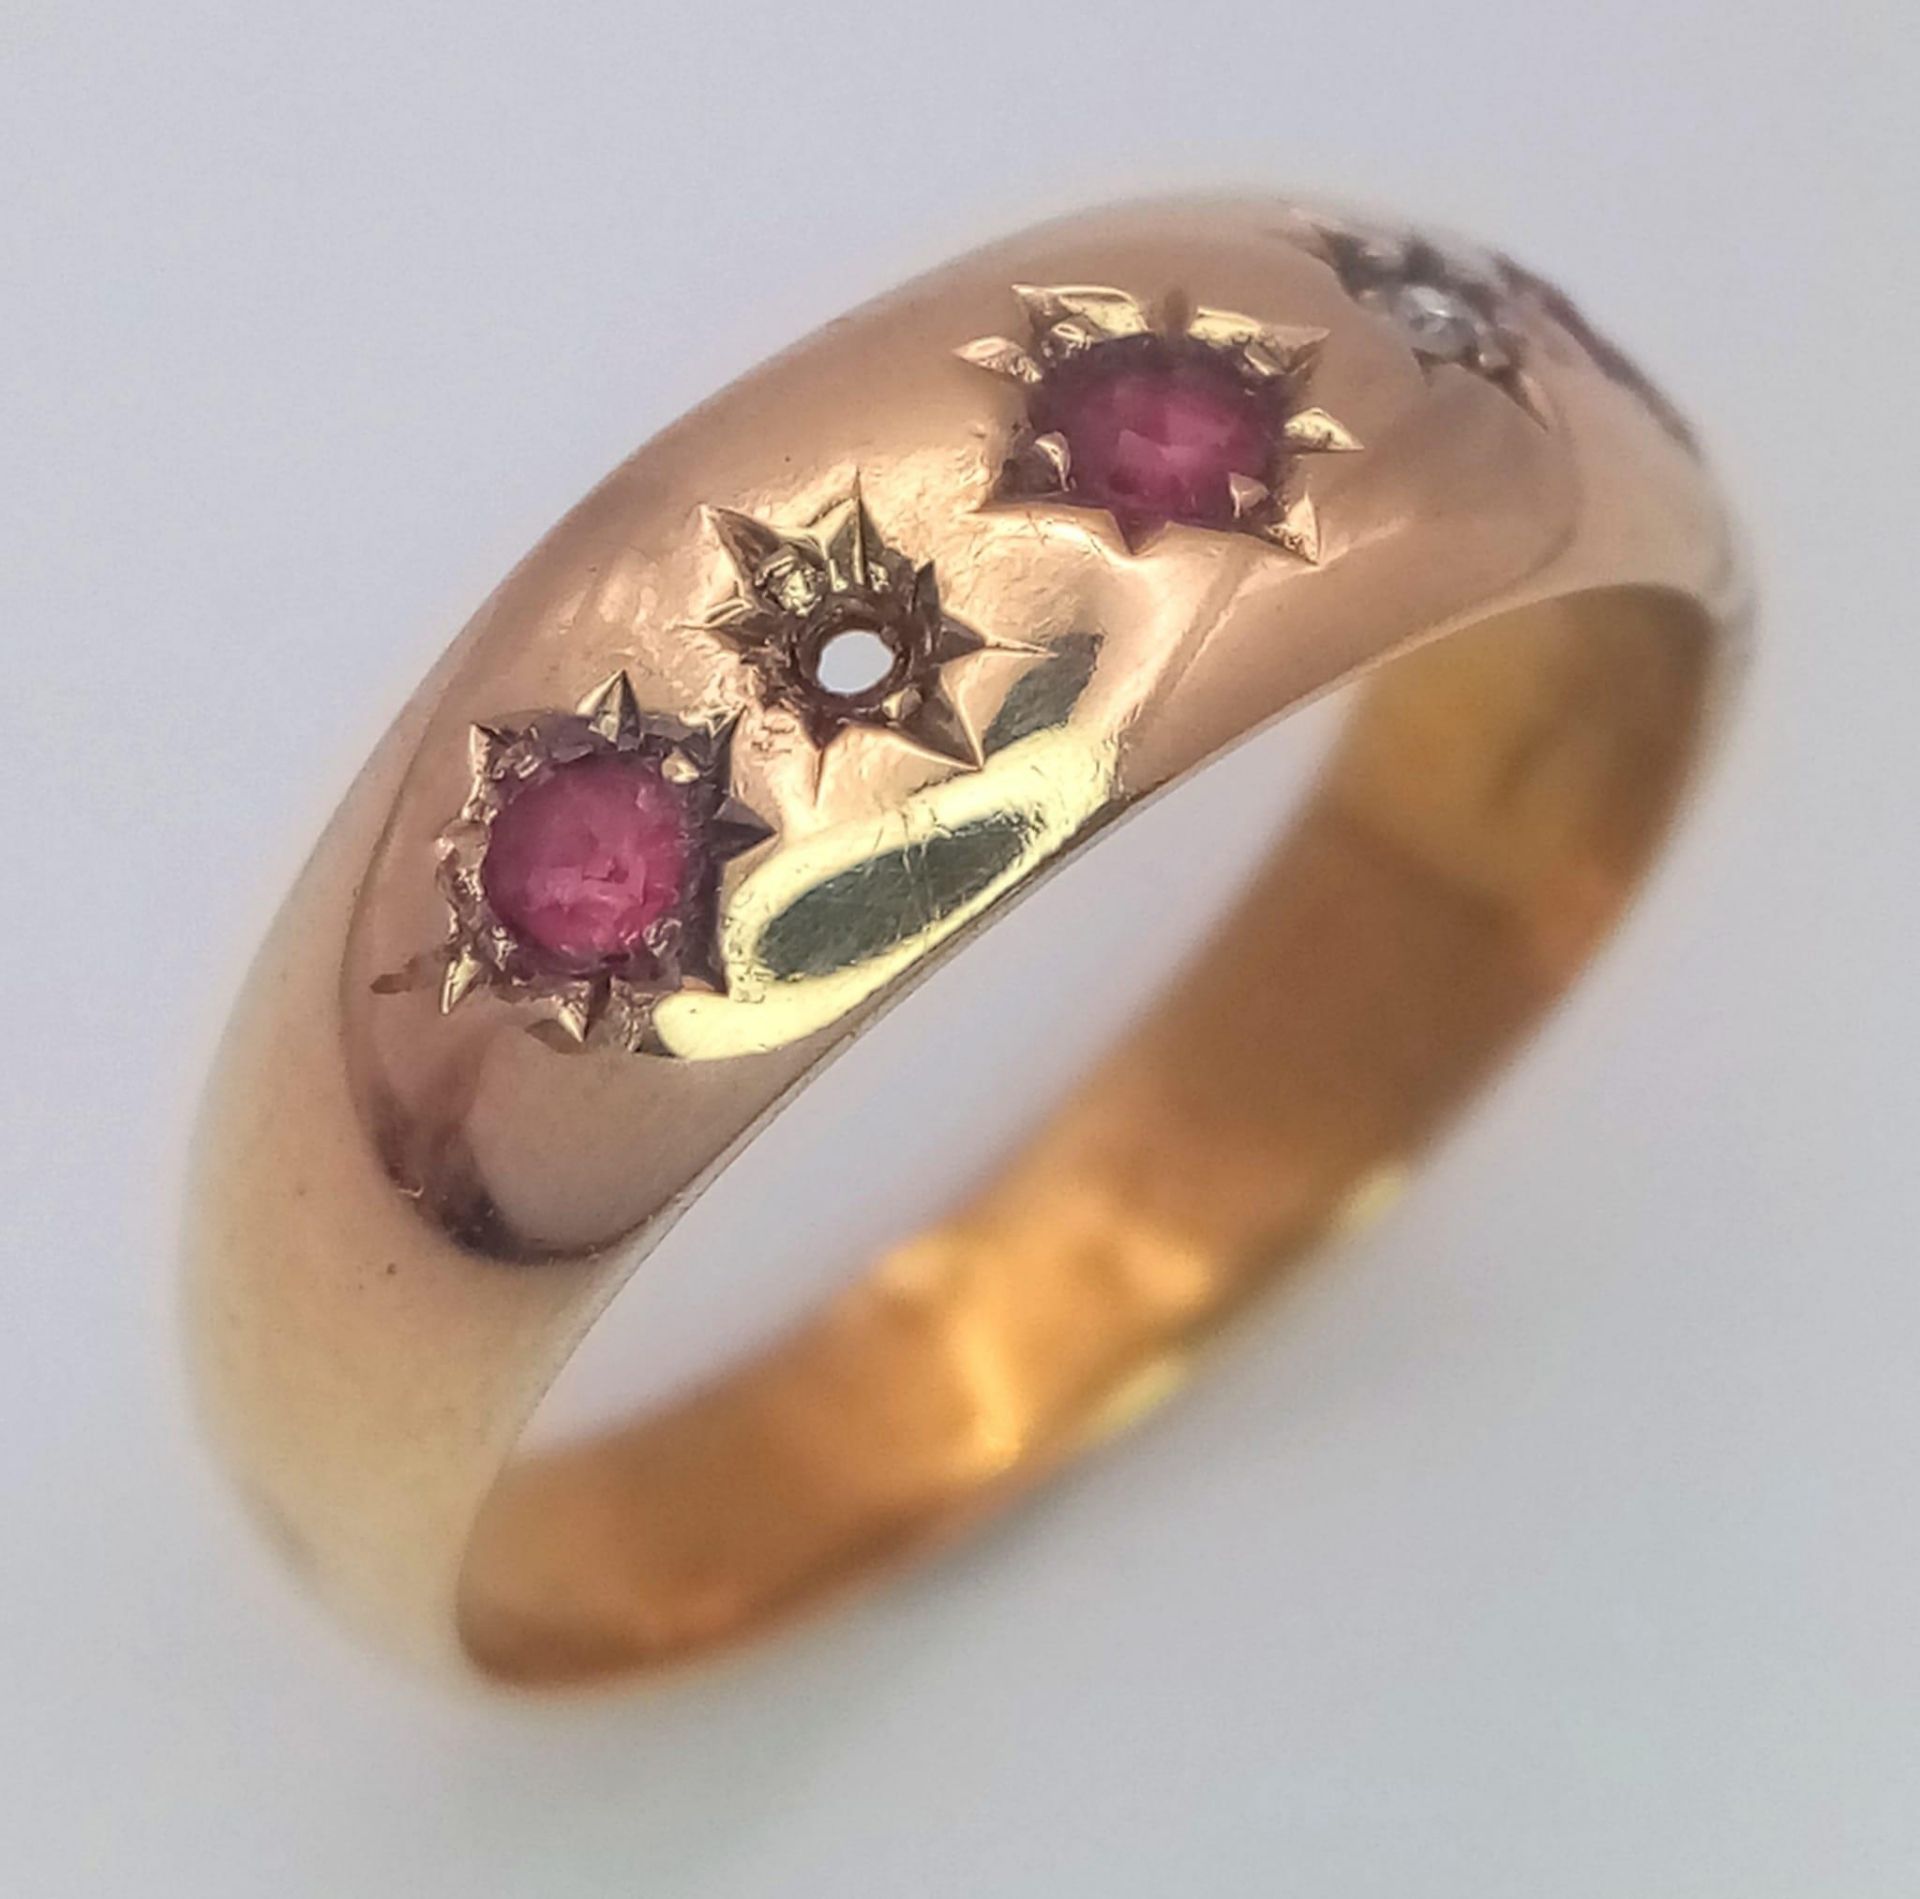 A VINTAGE 18K YELLOW GOLD DIAMOND & RUBY 5 STONE RING (one stone missing). 2.3G. SIZE N. - Image 2 of 4